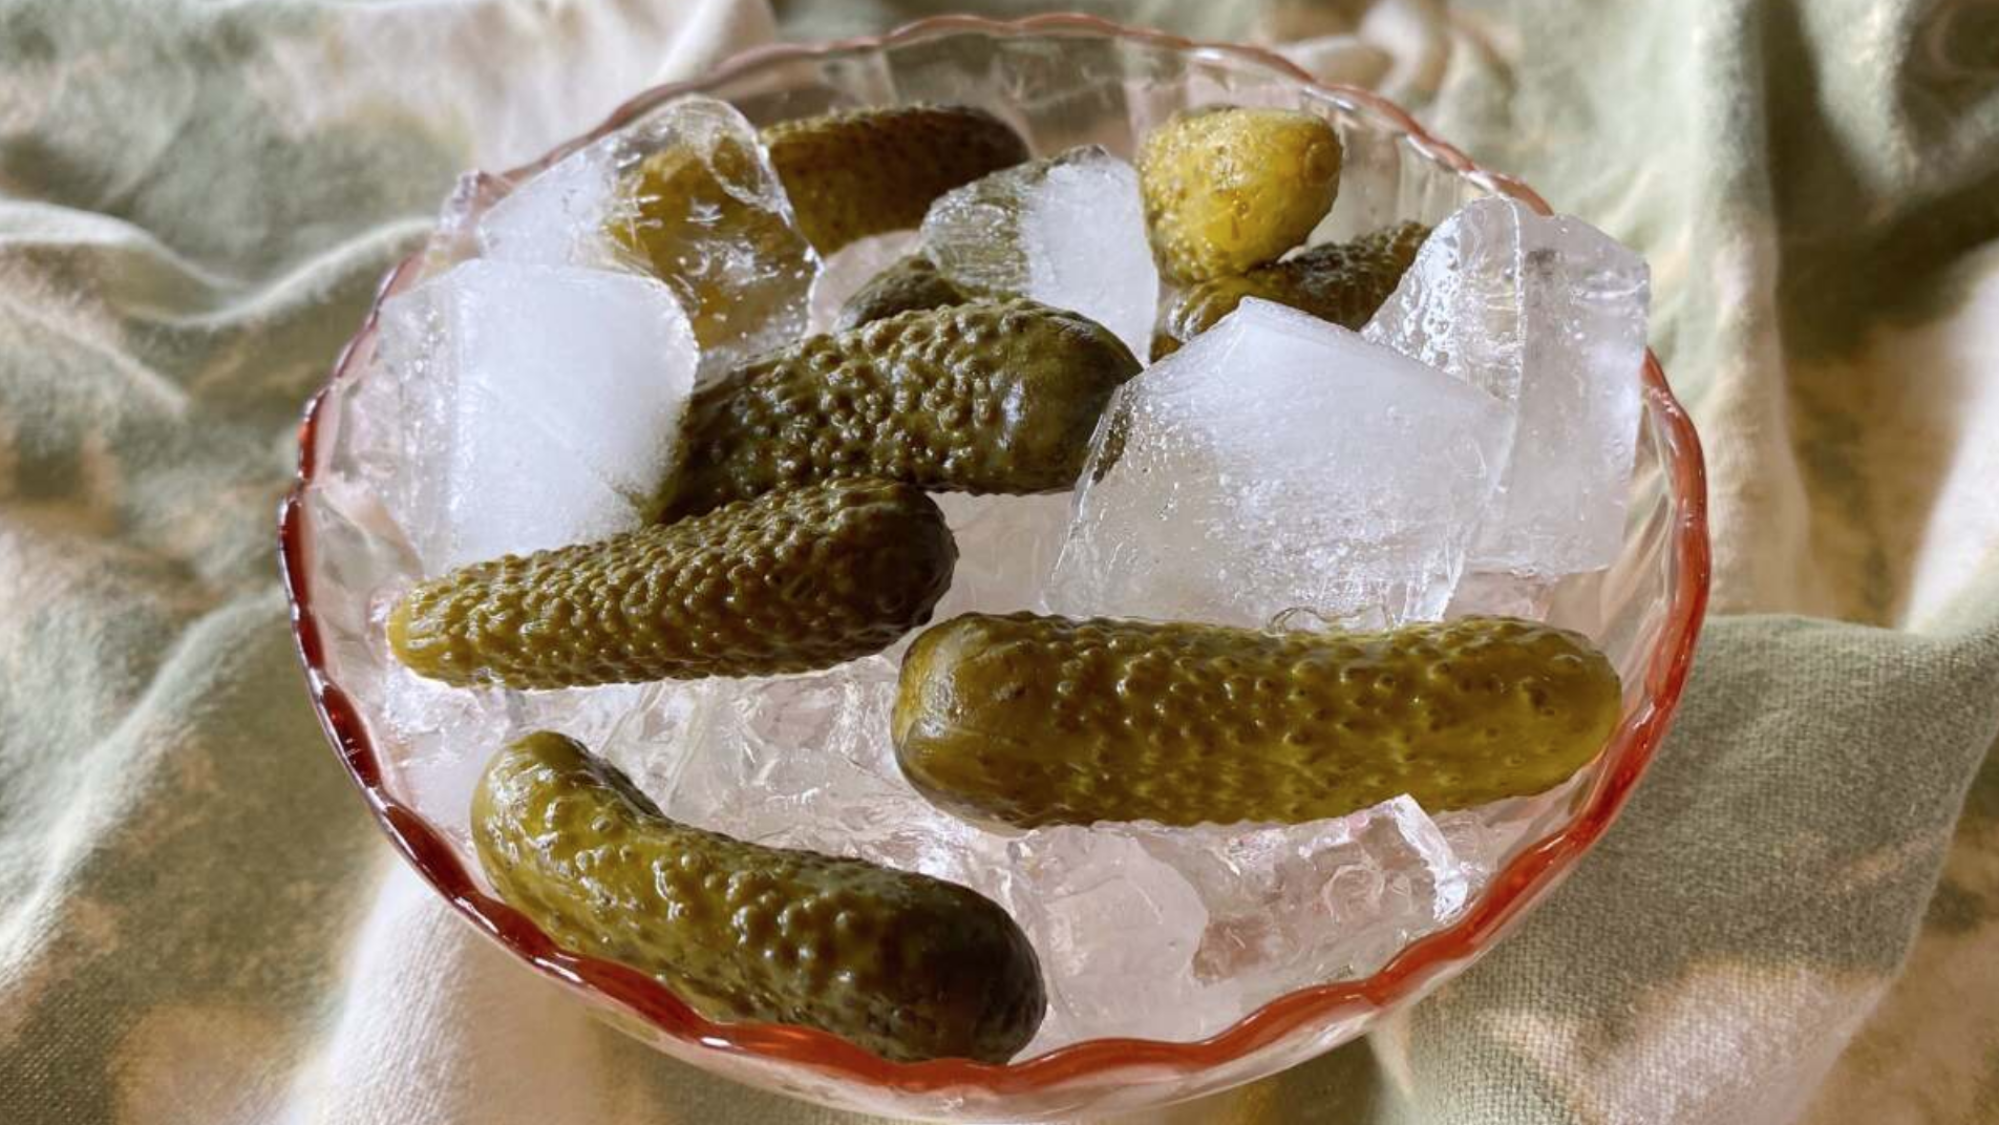 A bowl of ice with pickles on top.